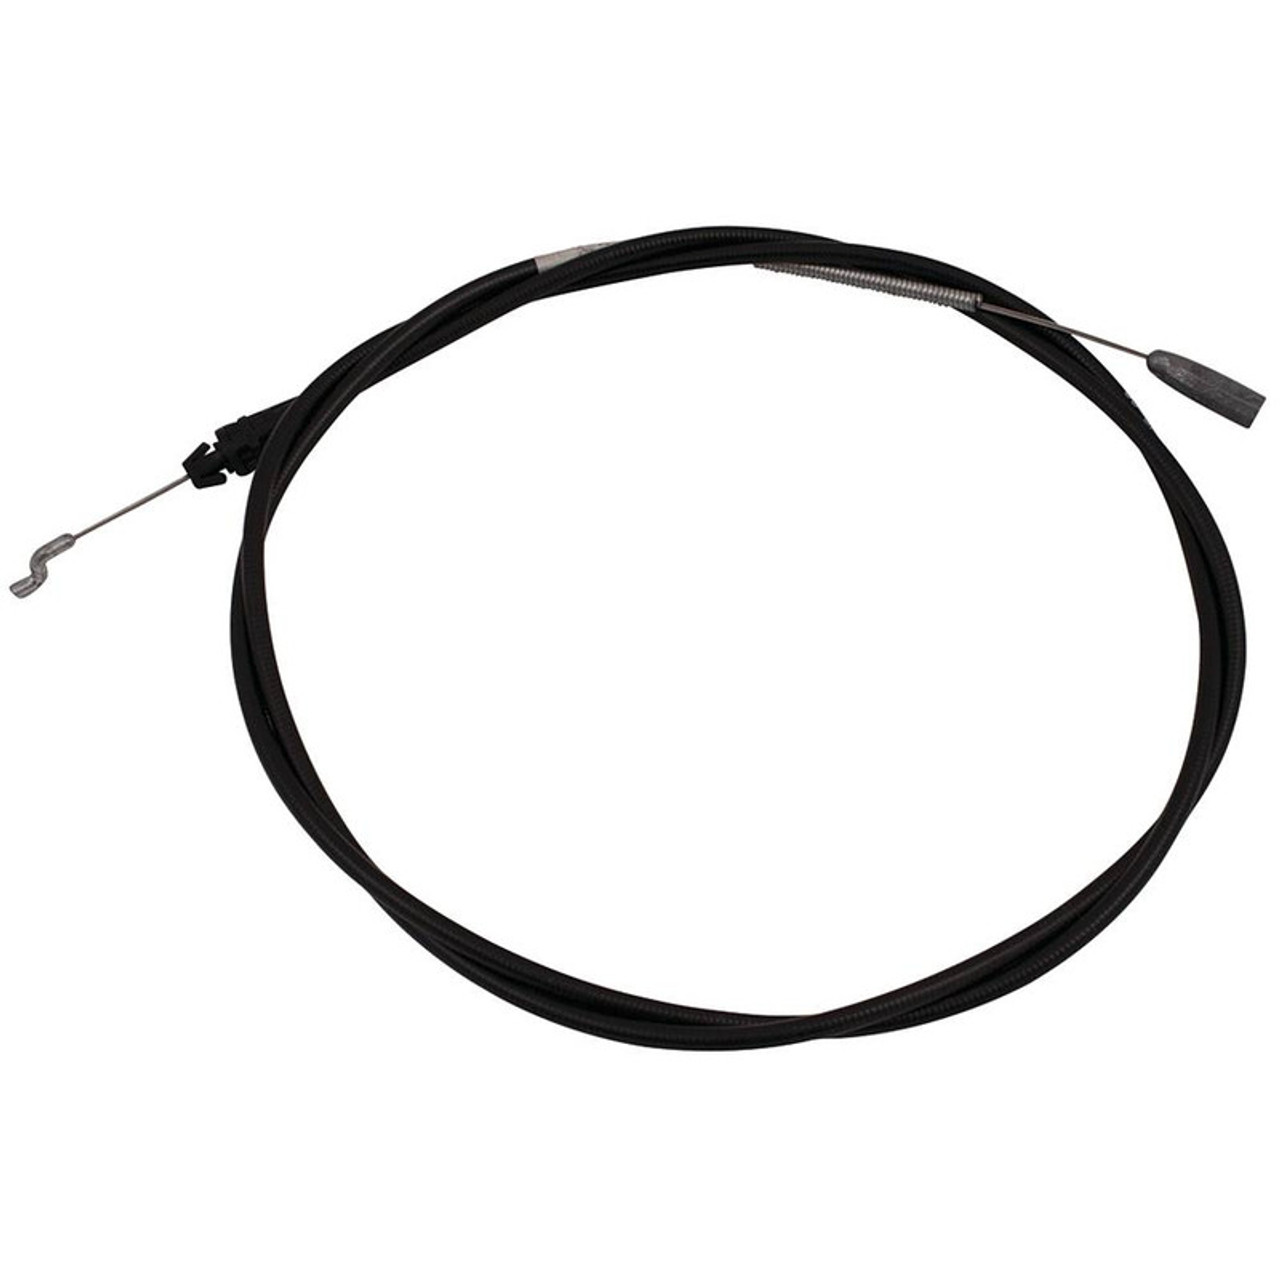 Brake Cable for Toro 933661, 93-3661, 21" Recycler 1995 and newer